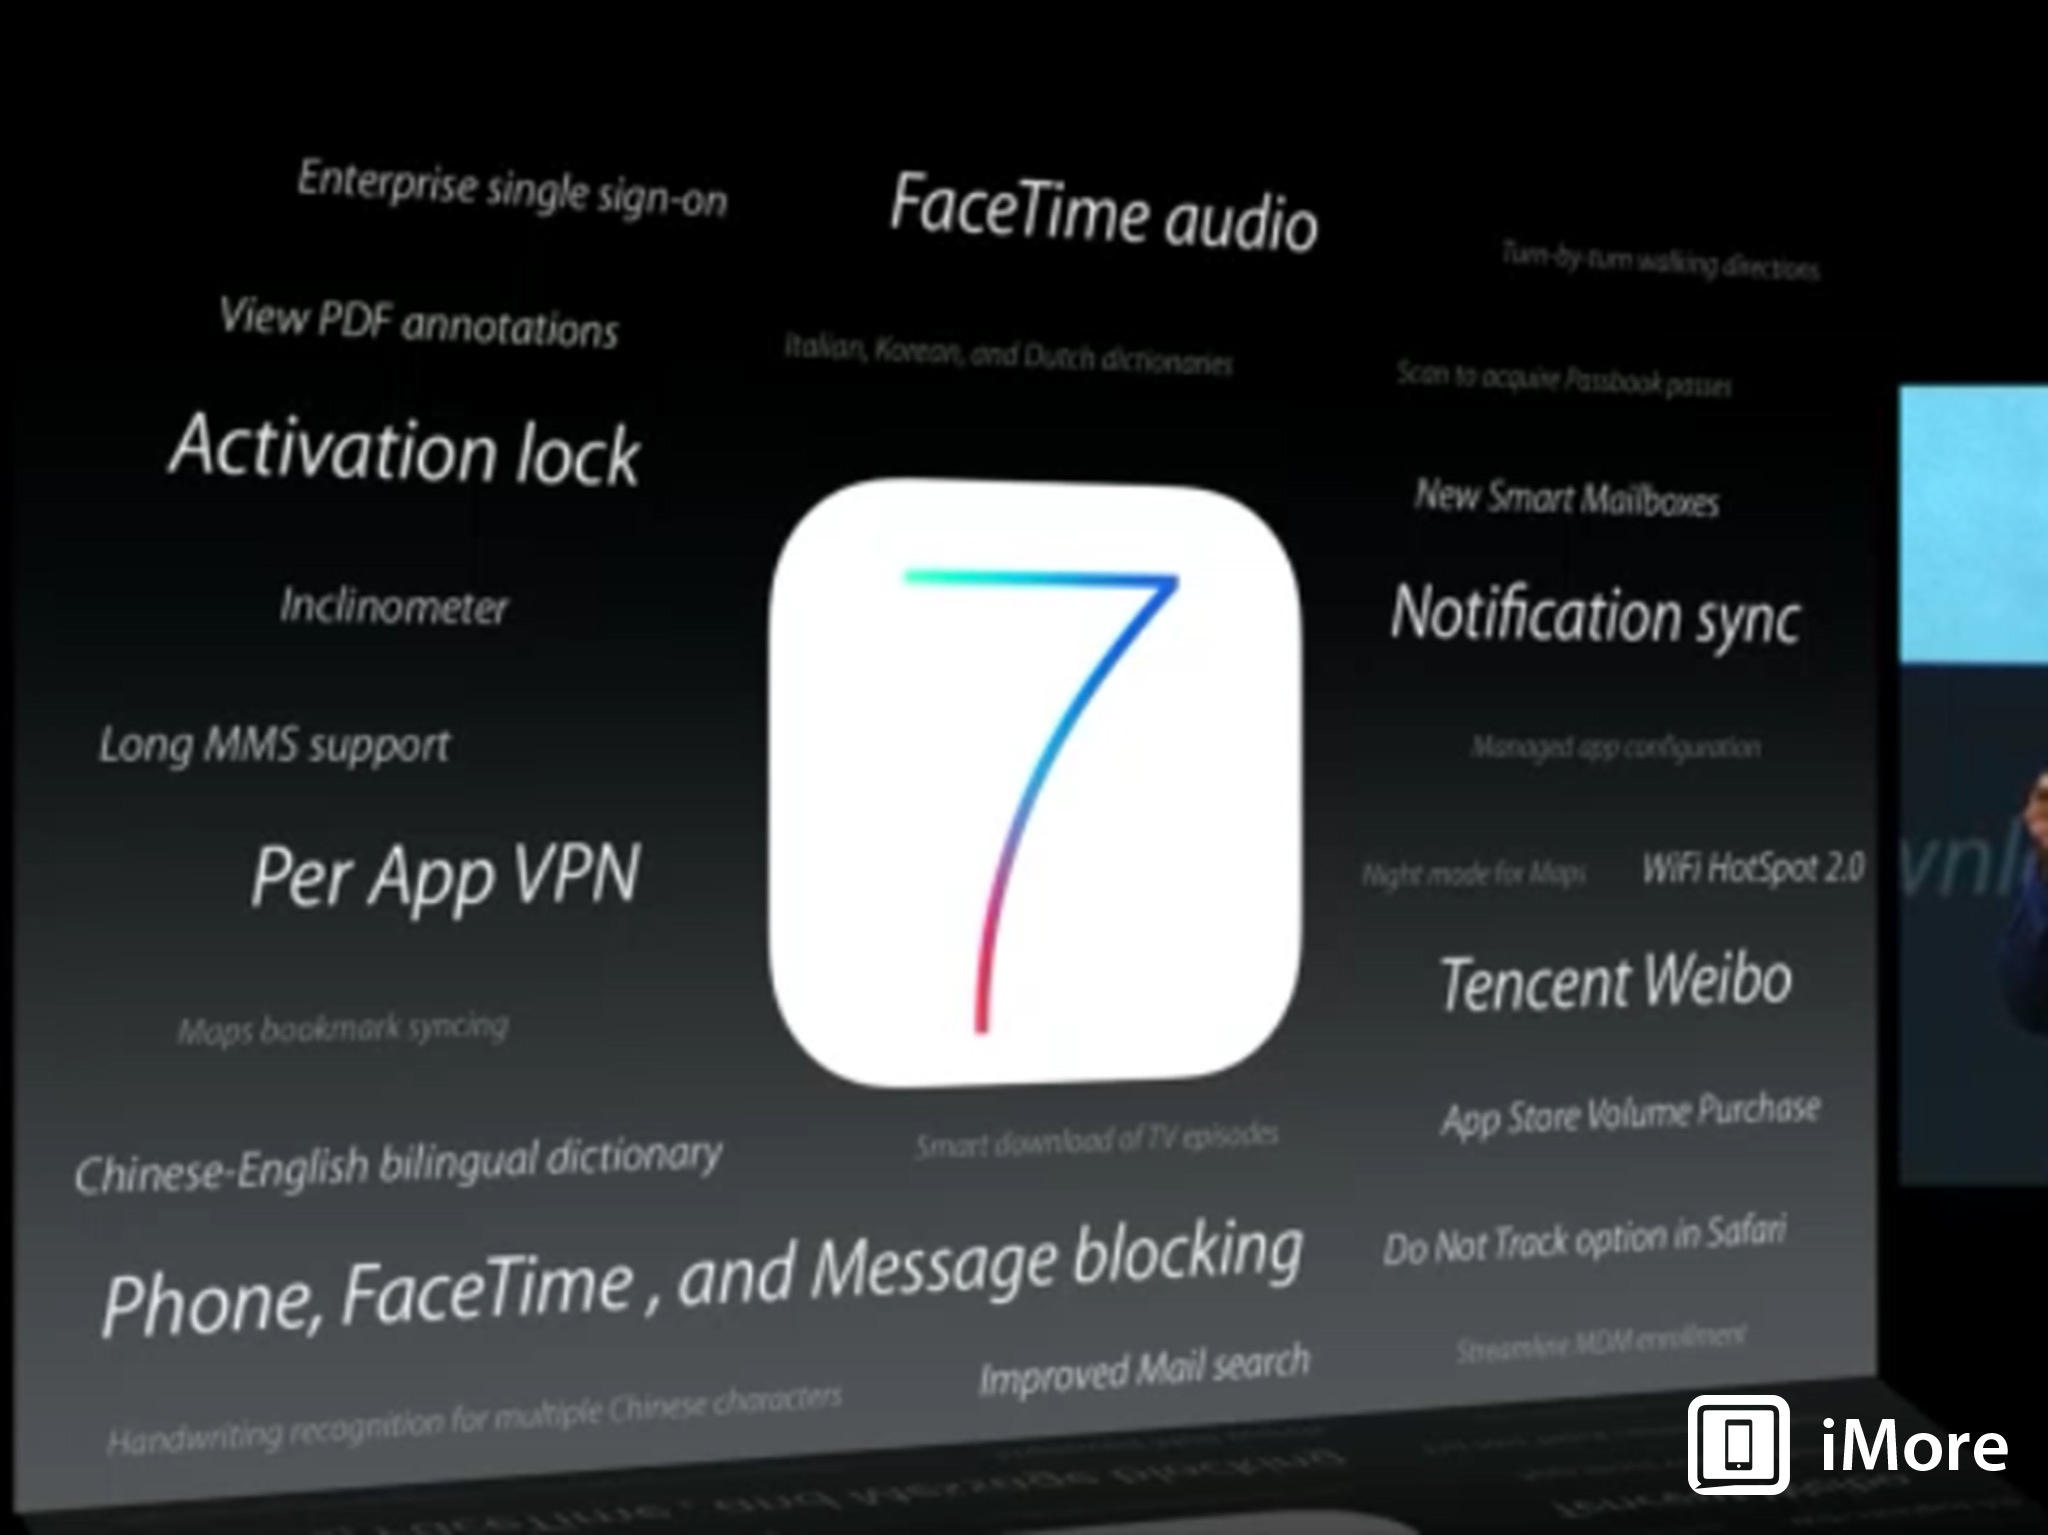 Game controller support in iOS 7 is a step in the right direction